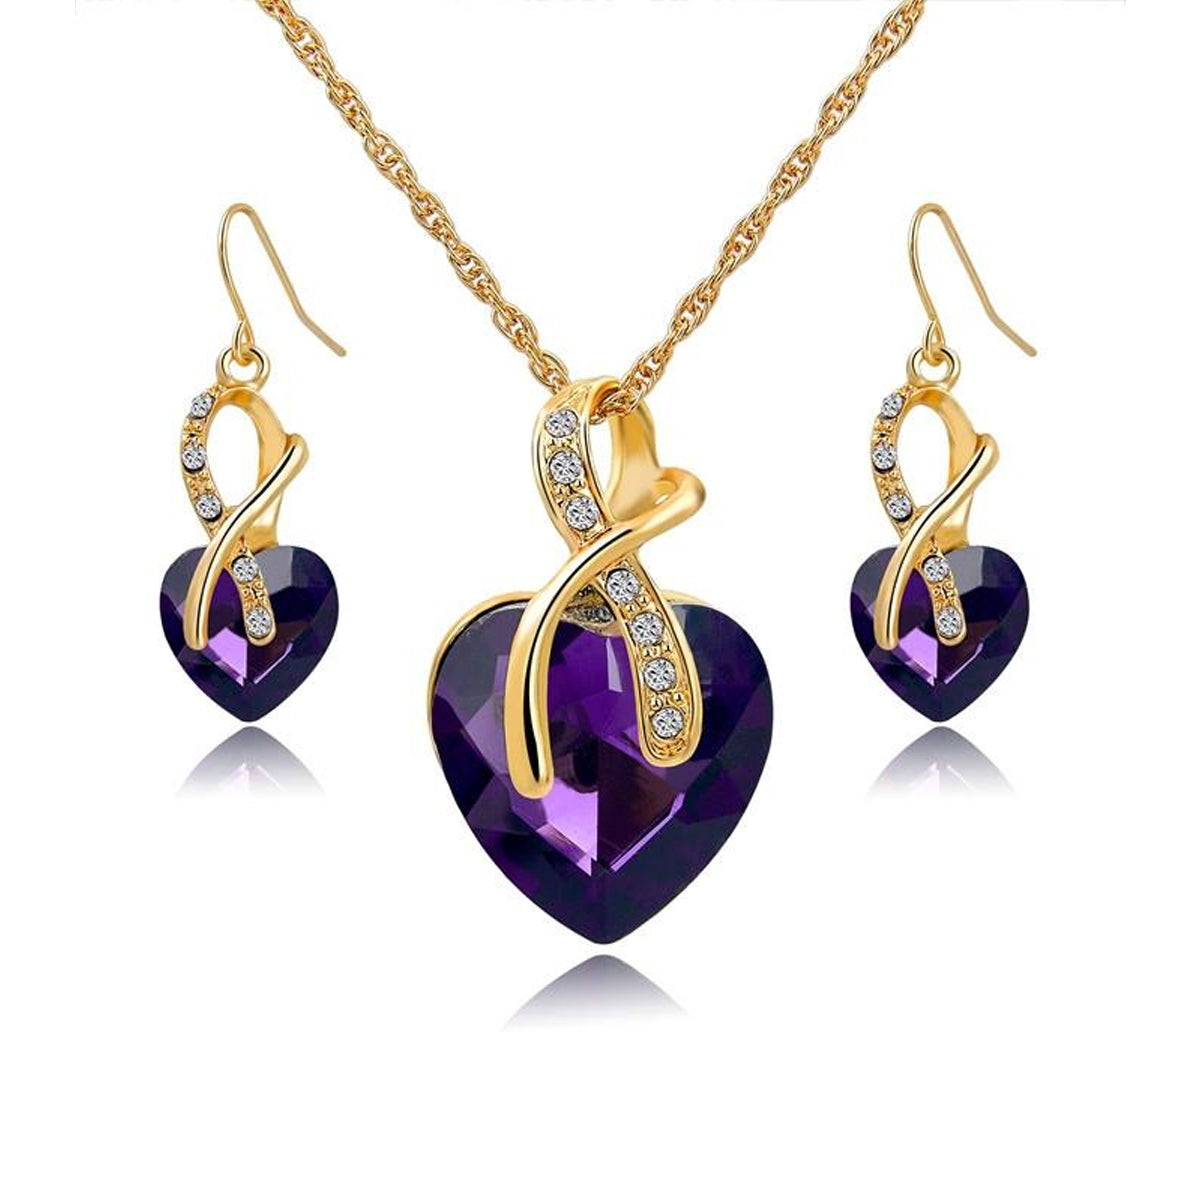 2 Sets of Wishful Heart Necklace and Earring Sets